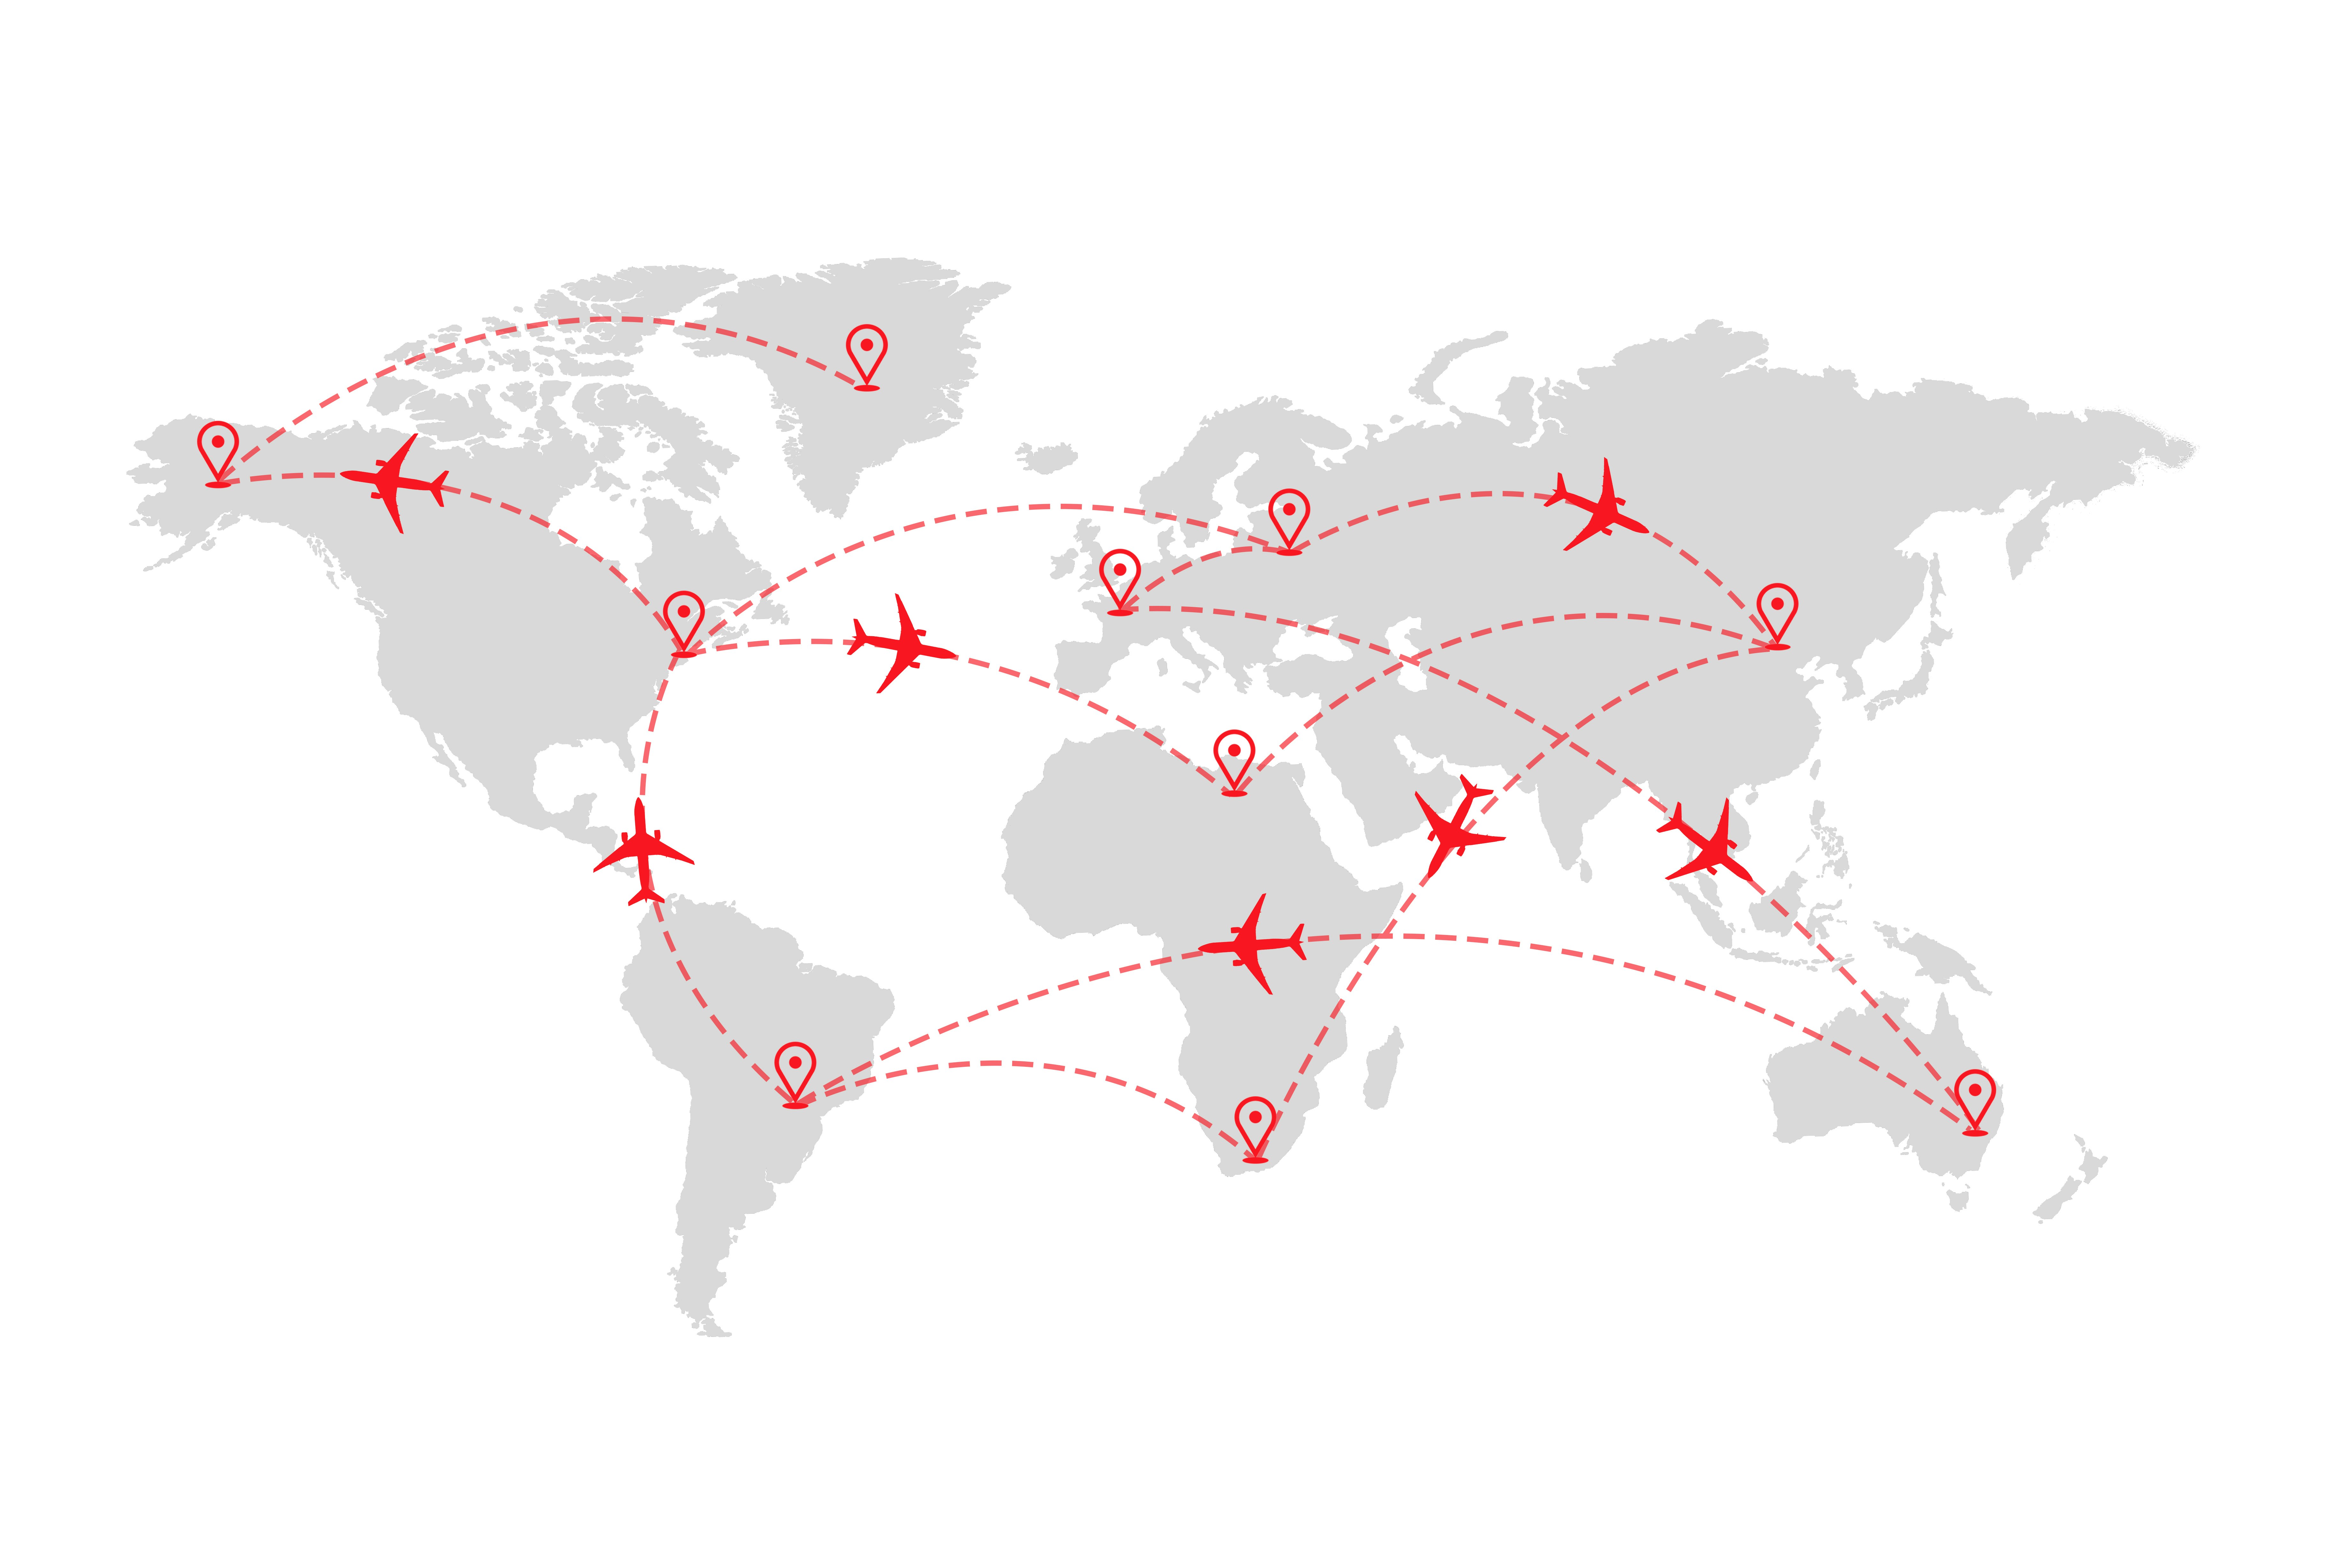 Airline path dotted on a world map in red